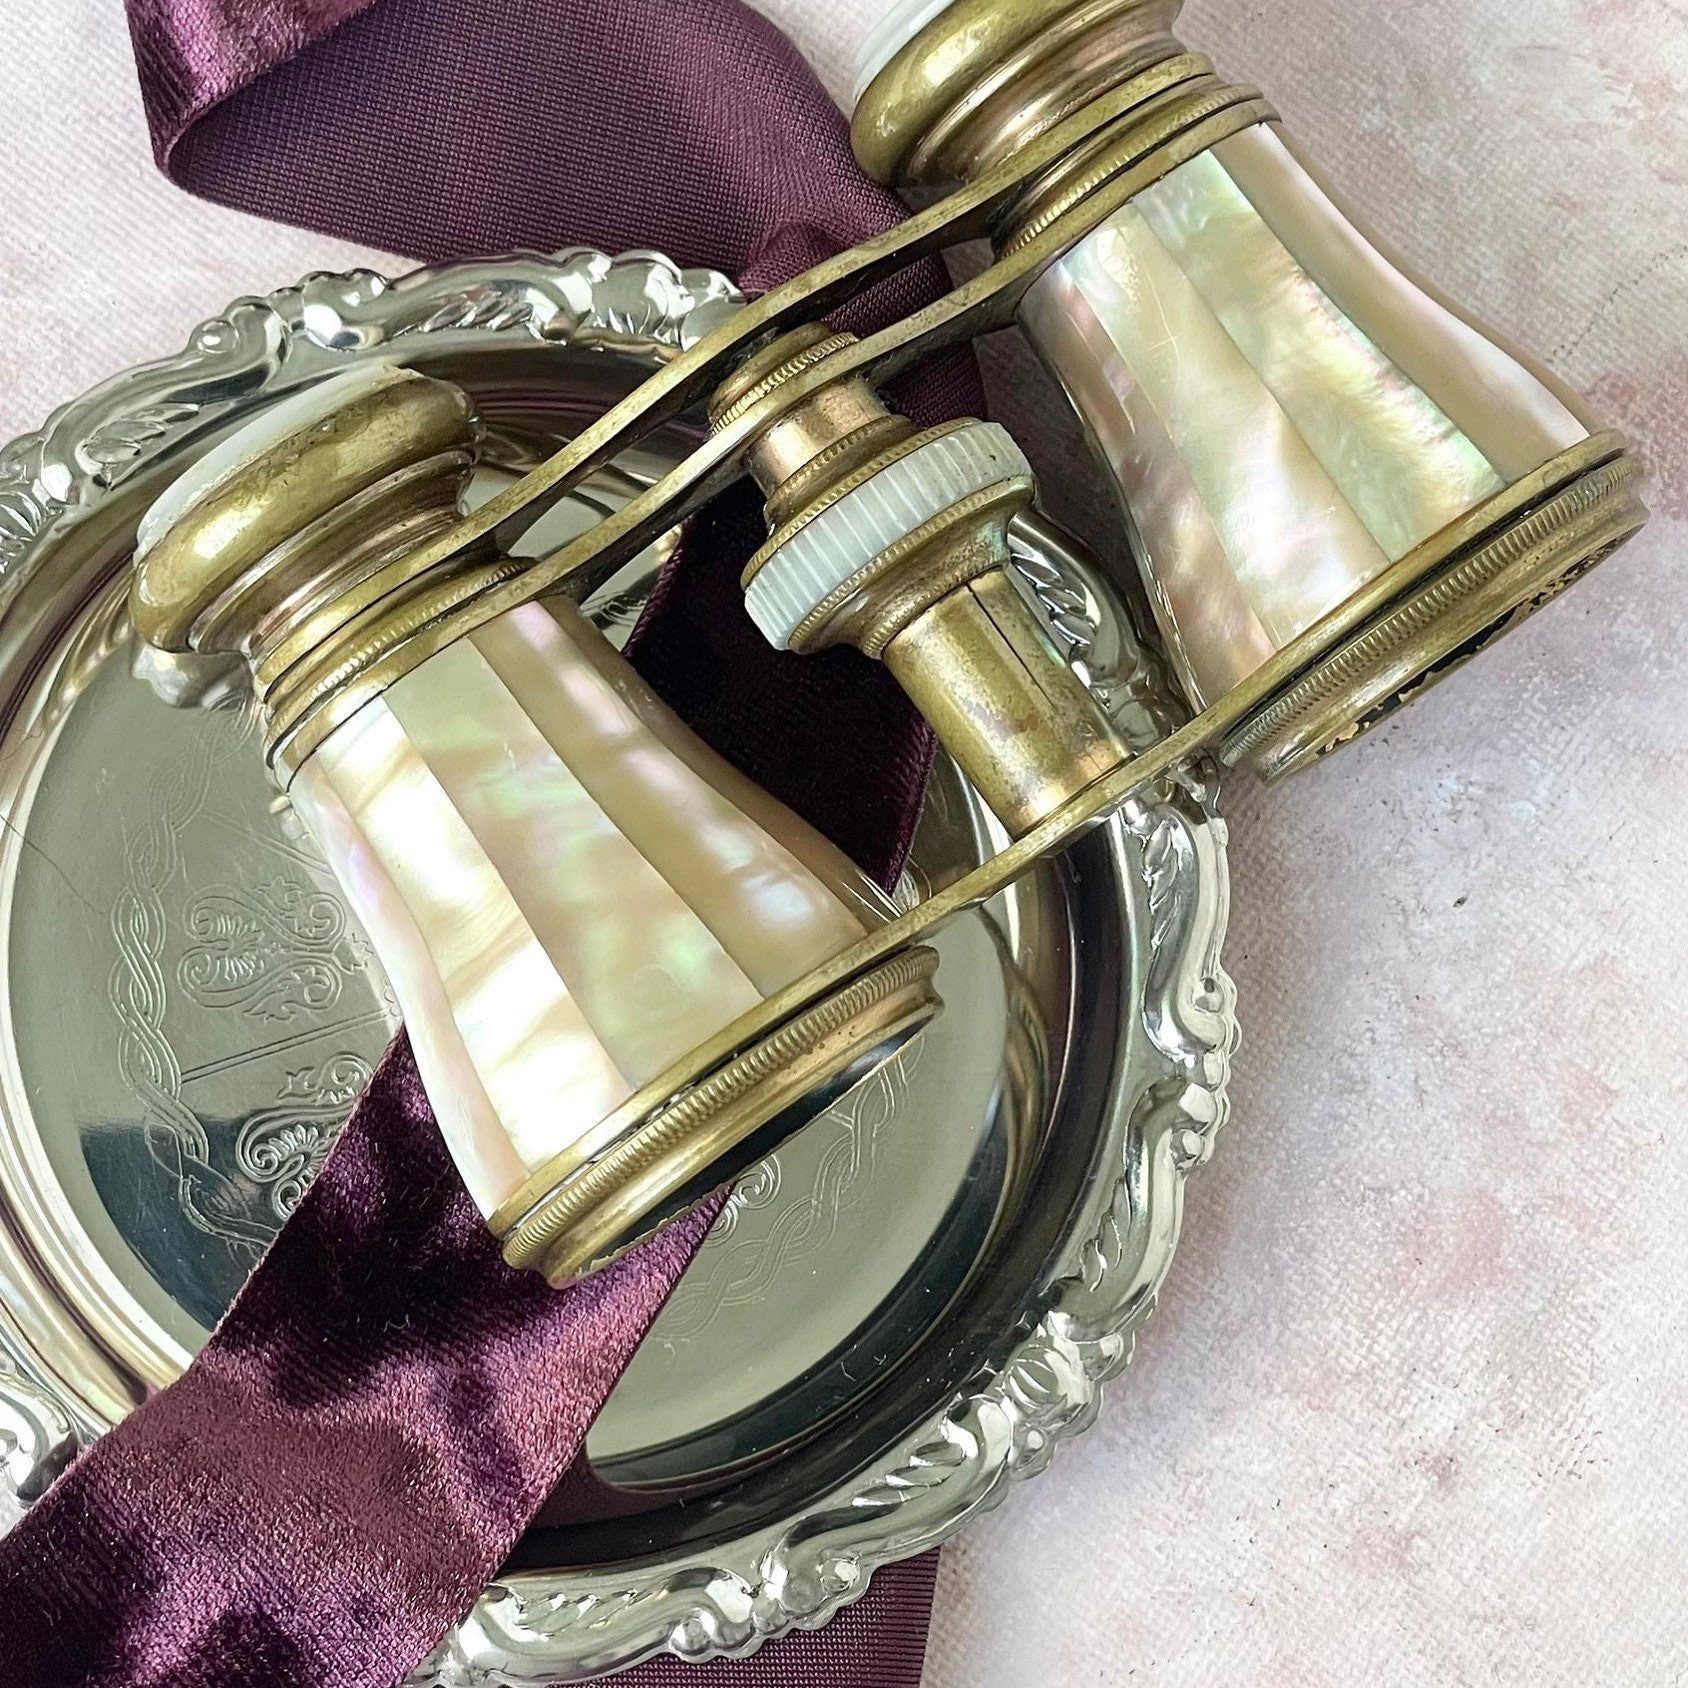 Vintage opera glasses on silver fish and plum ribbon - Flat lay props from Champagne & GRIT